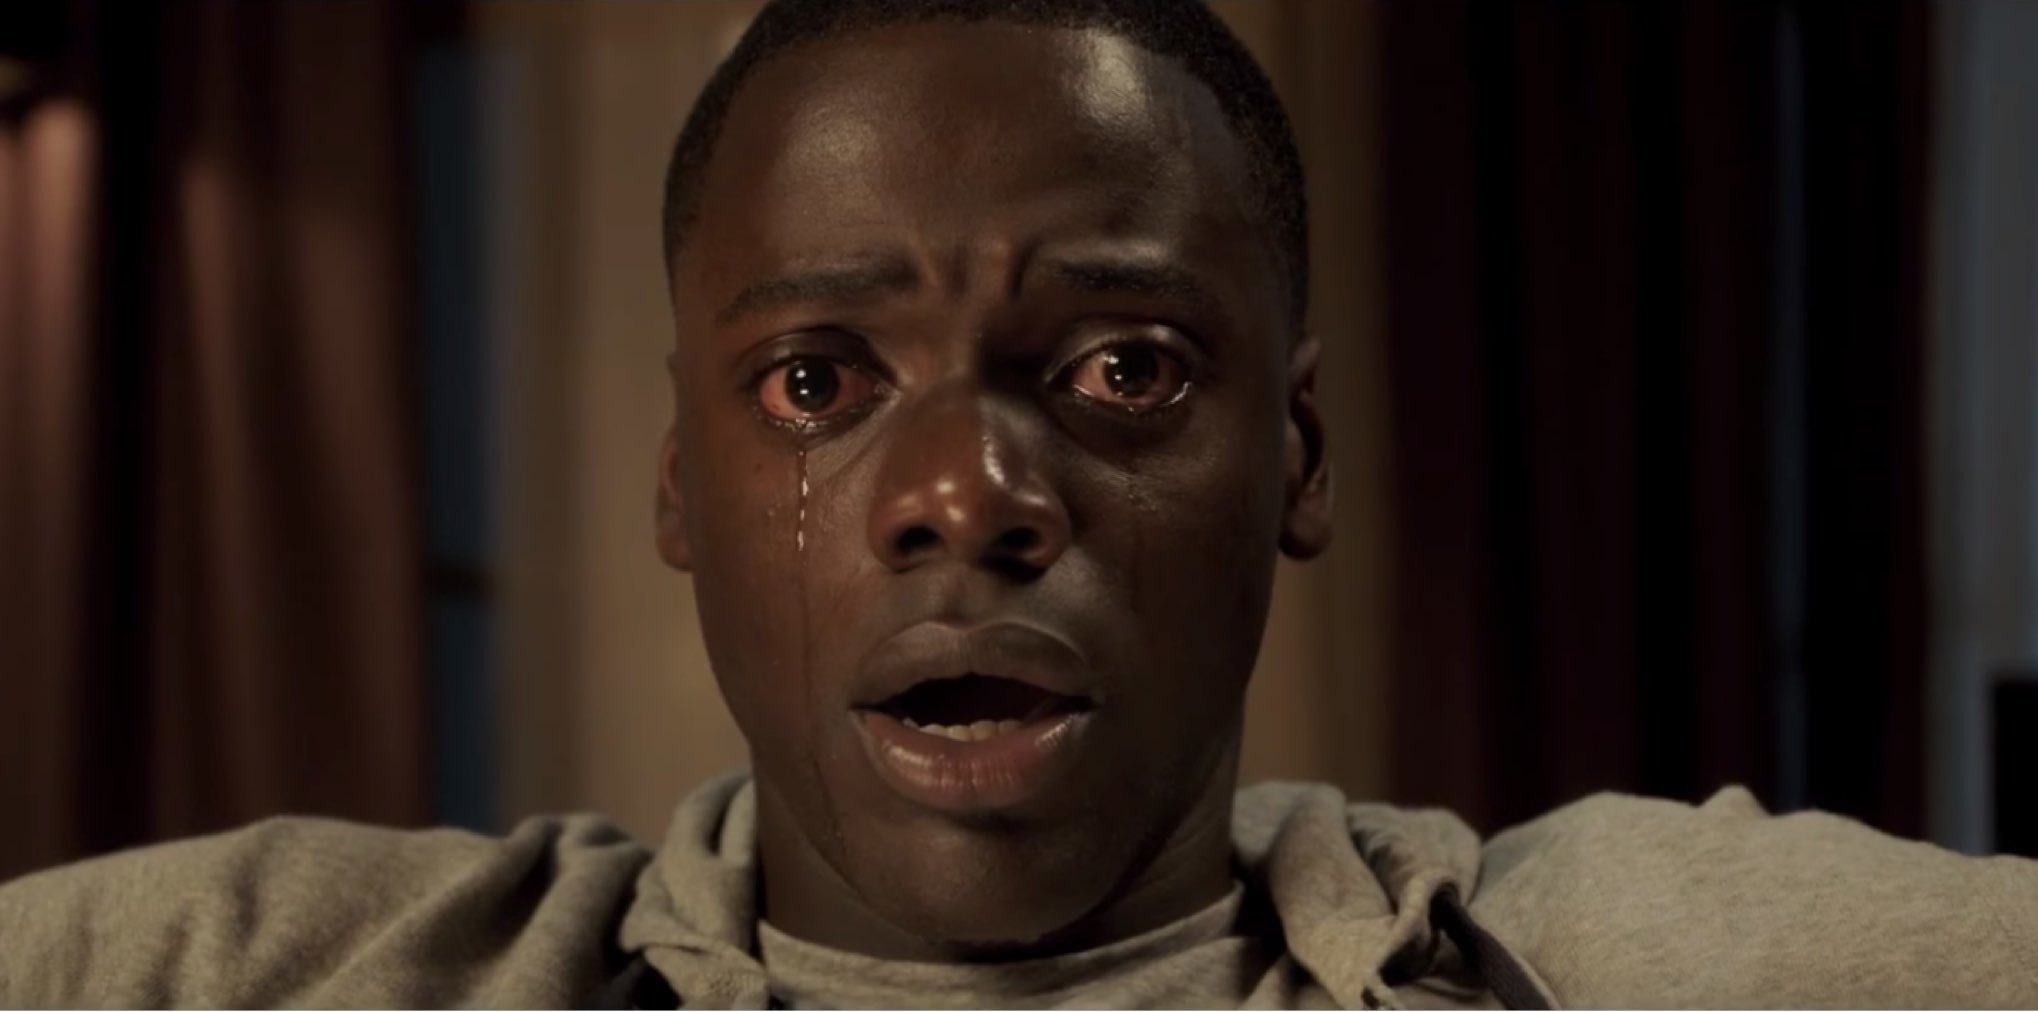 Jordan Peele Wants You To Know "Get Out" Is A Documentary